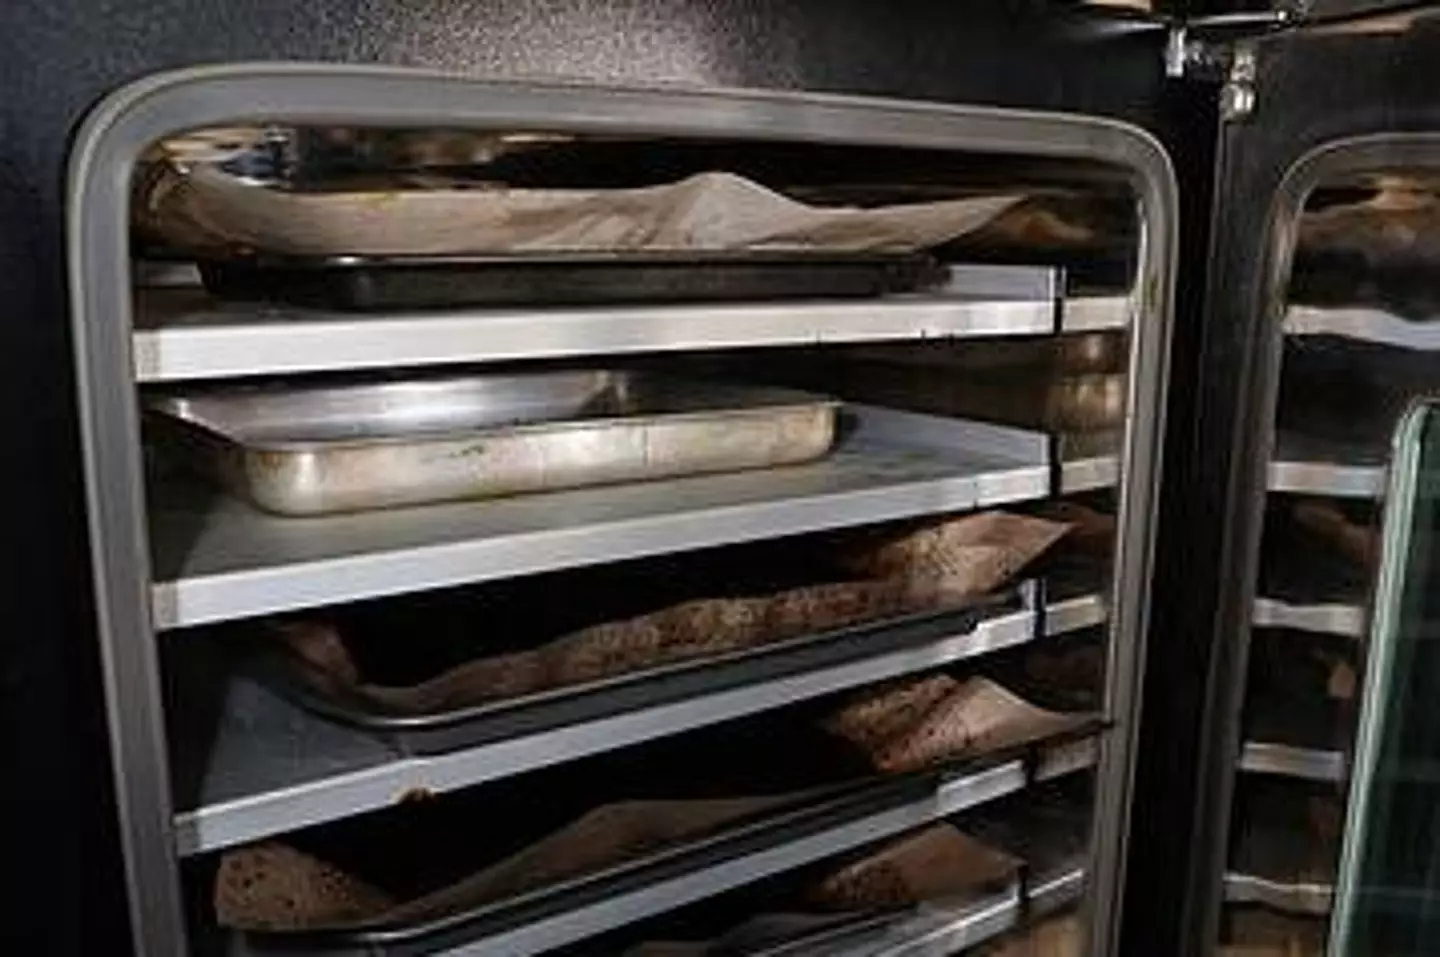 Police found ovens for baking cannabis products on site.